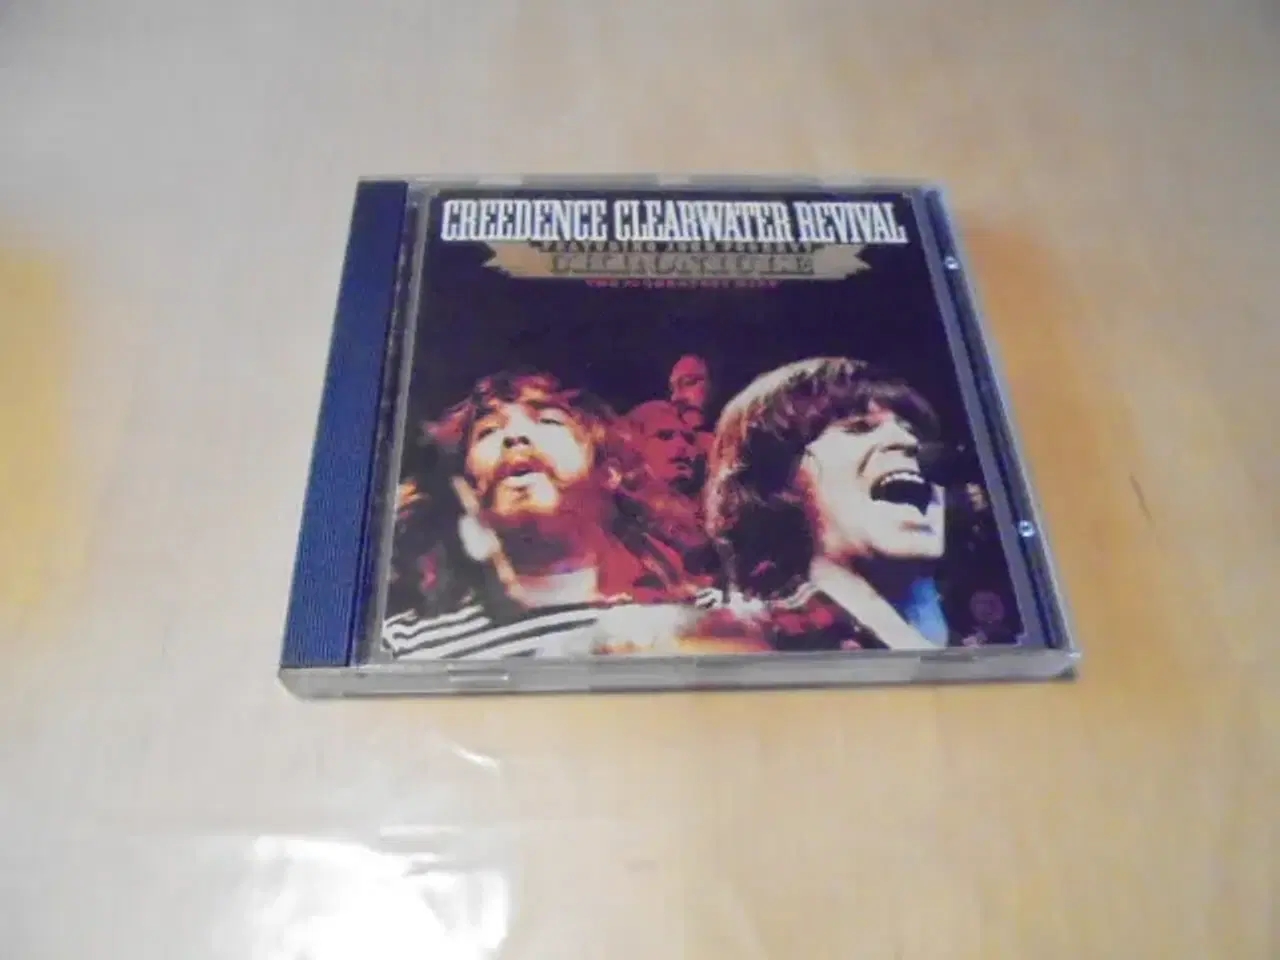 Billede 1 - CD – Credence Clearwater Revival  “Cronicle”